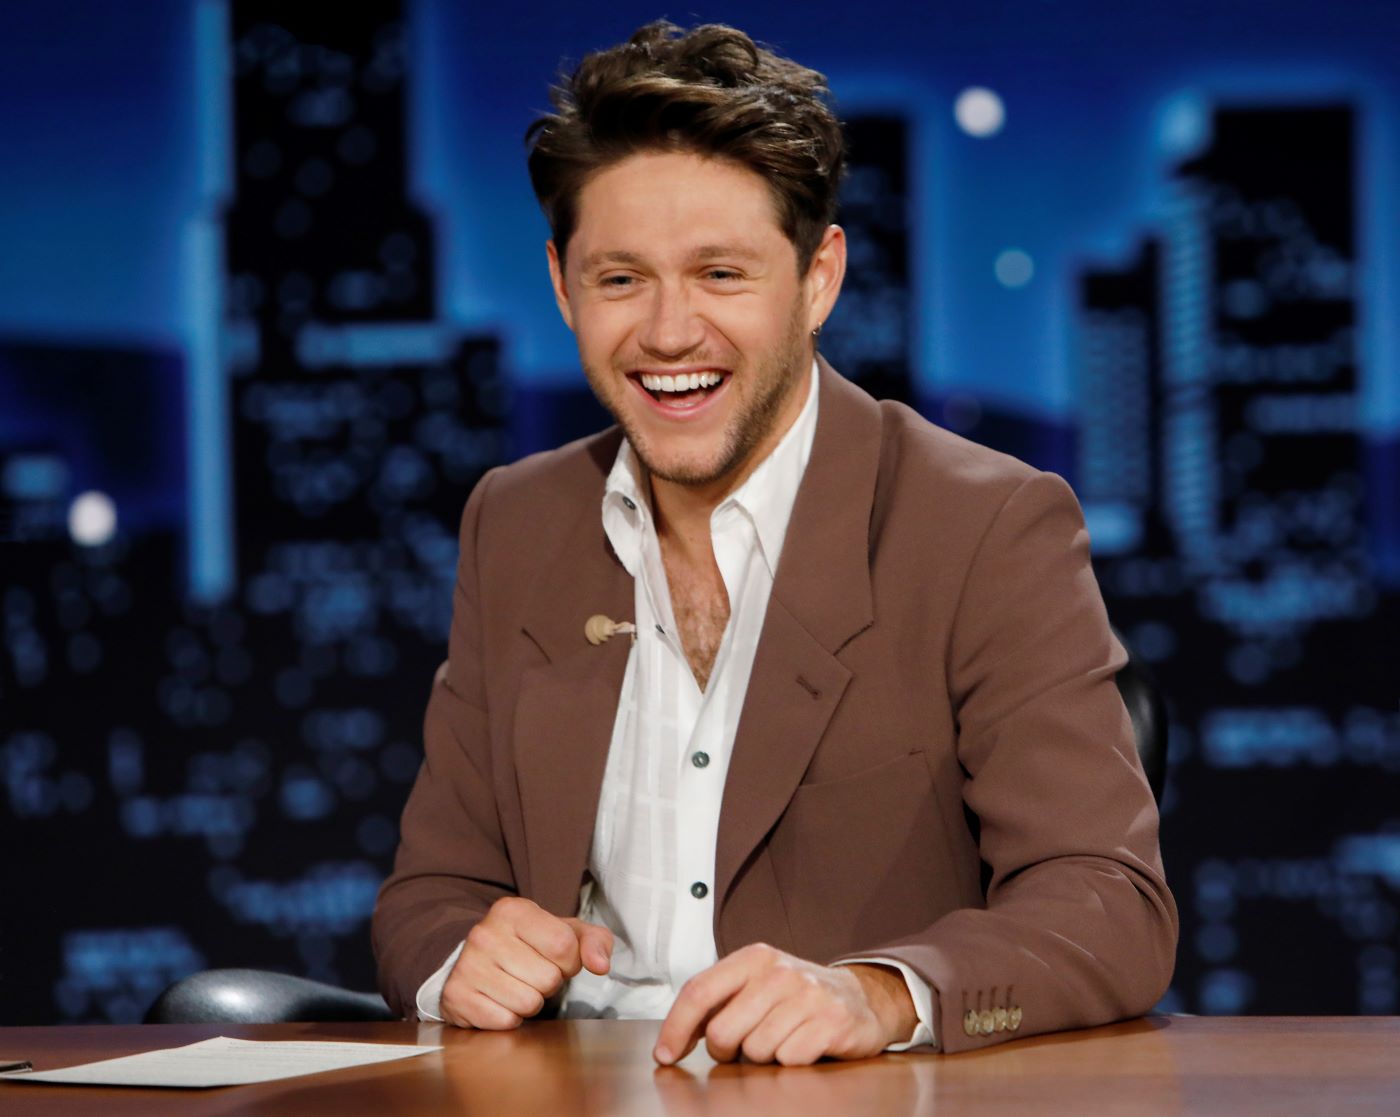 Niall Horan dressed in a white dress shirt and a black suit jacket sitting at a desk in front of a black and blue background.